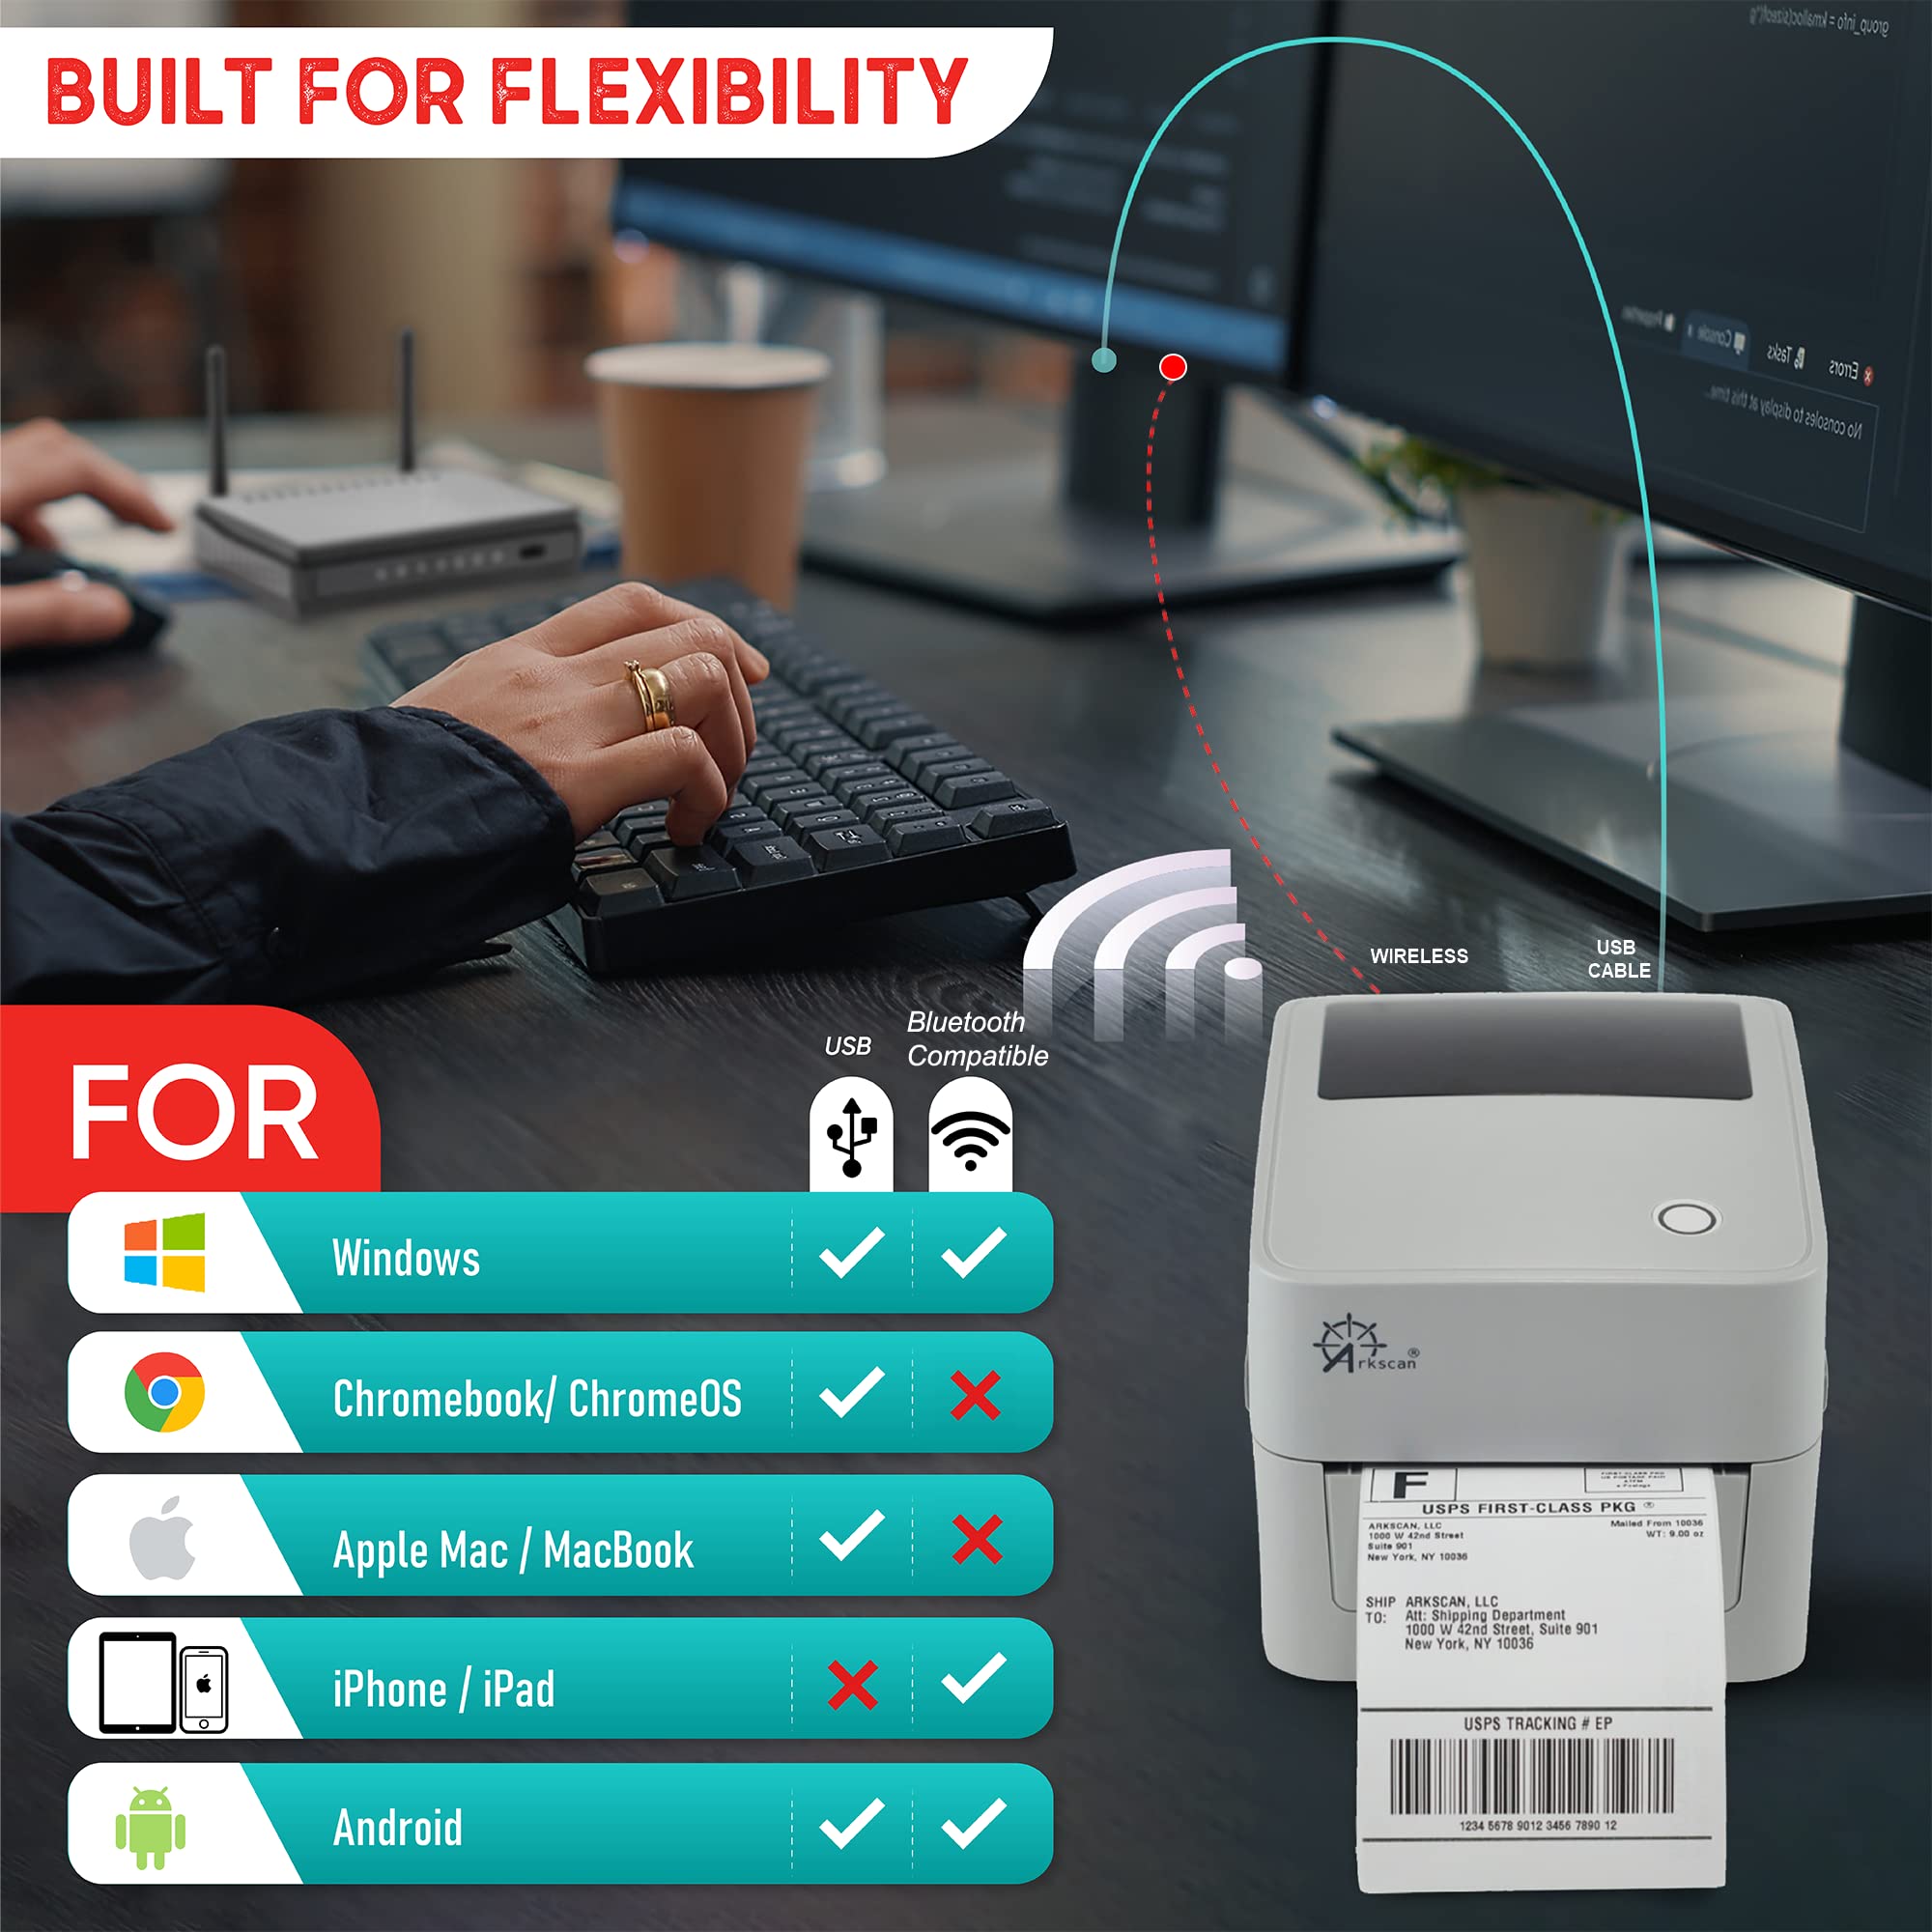 Arkscan 2054K-AP Auto Peel Shipping Label Printer, Separate Label from Backsheet Automatically, Print on Windows Mac Chromebook via USB, Print Wireless for Bluetooth on Windows ONLY, UPS USPS FedEx